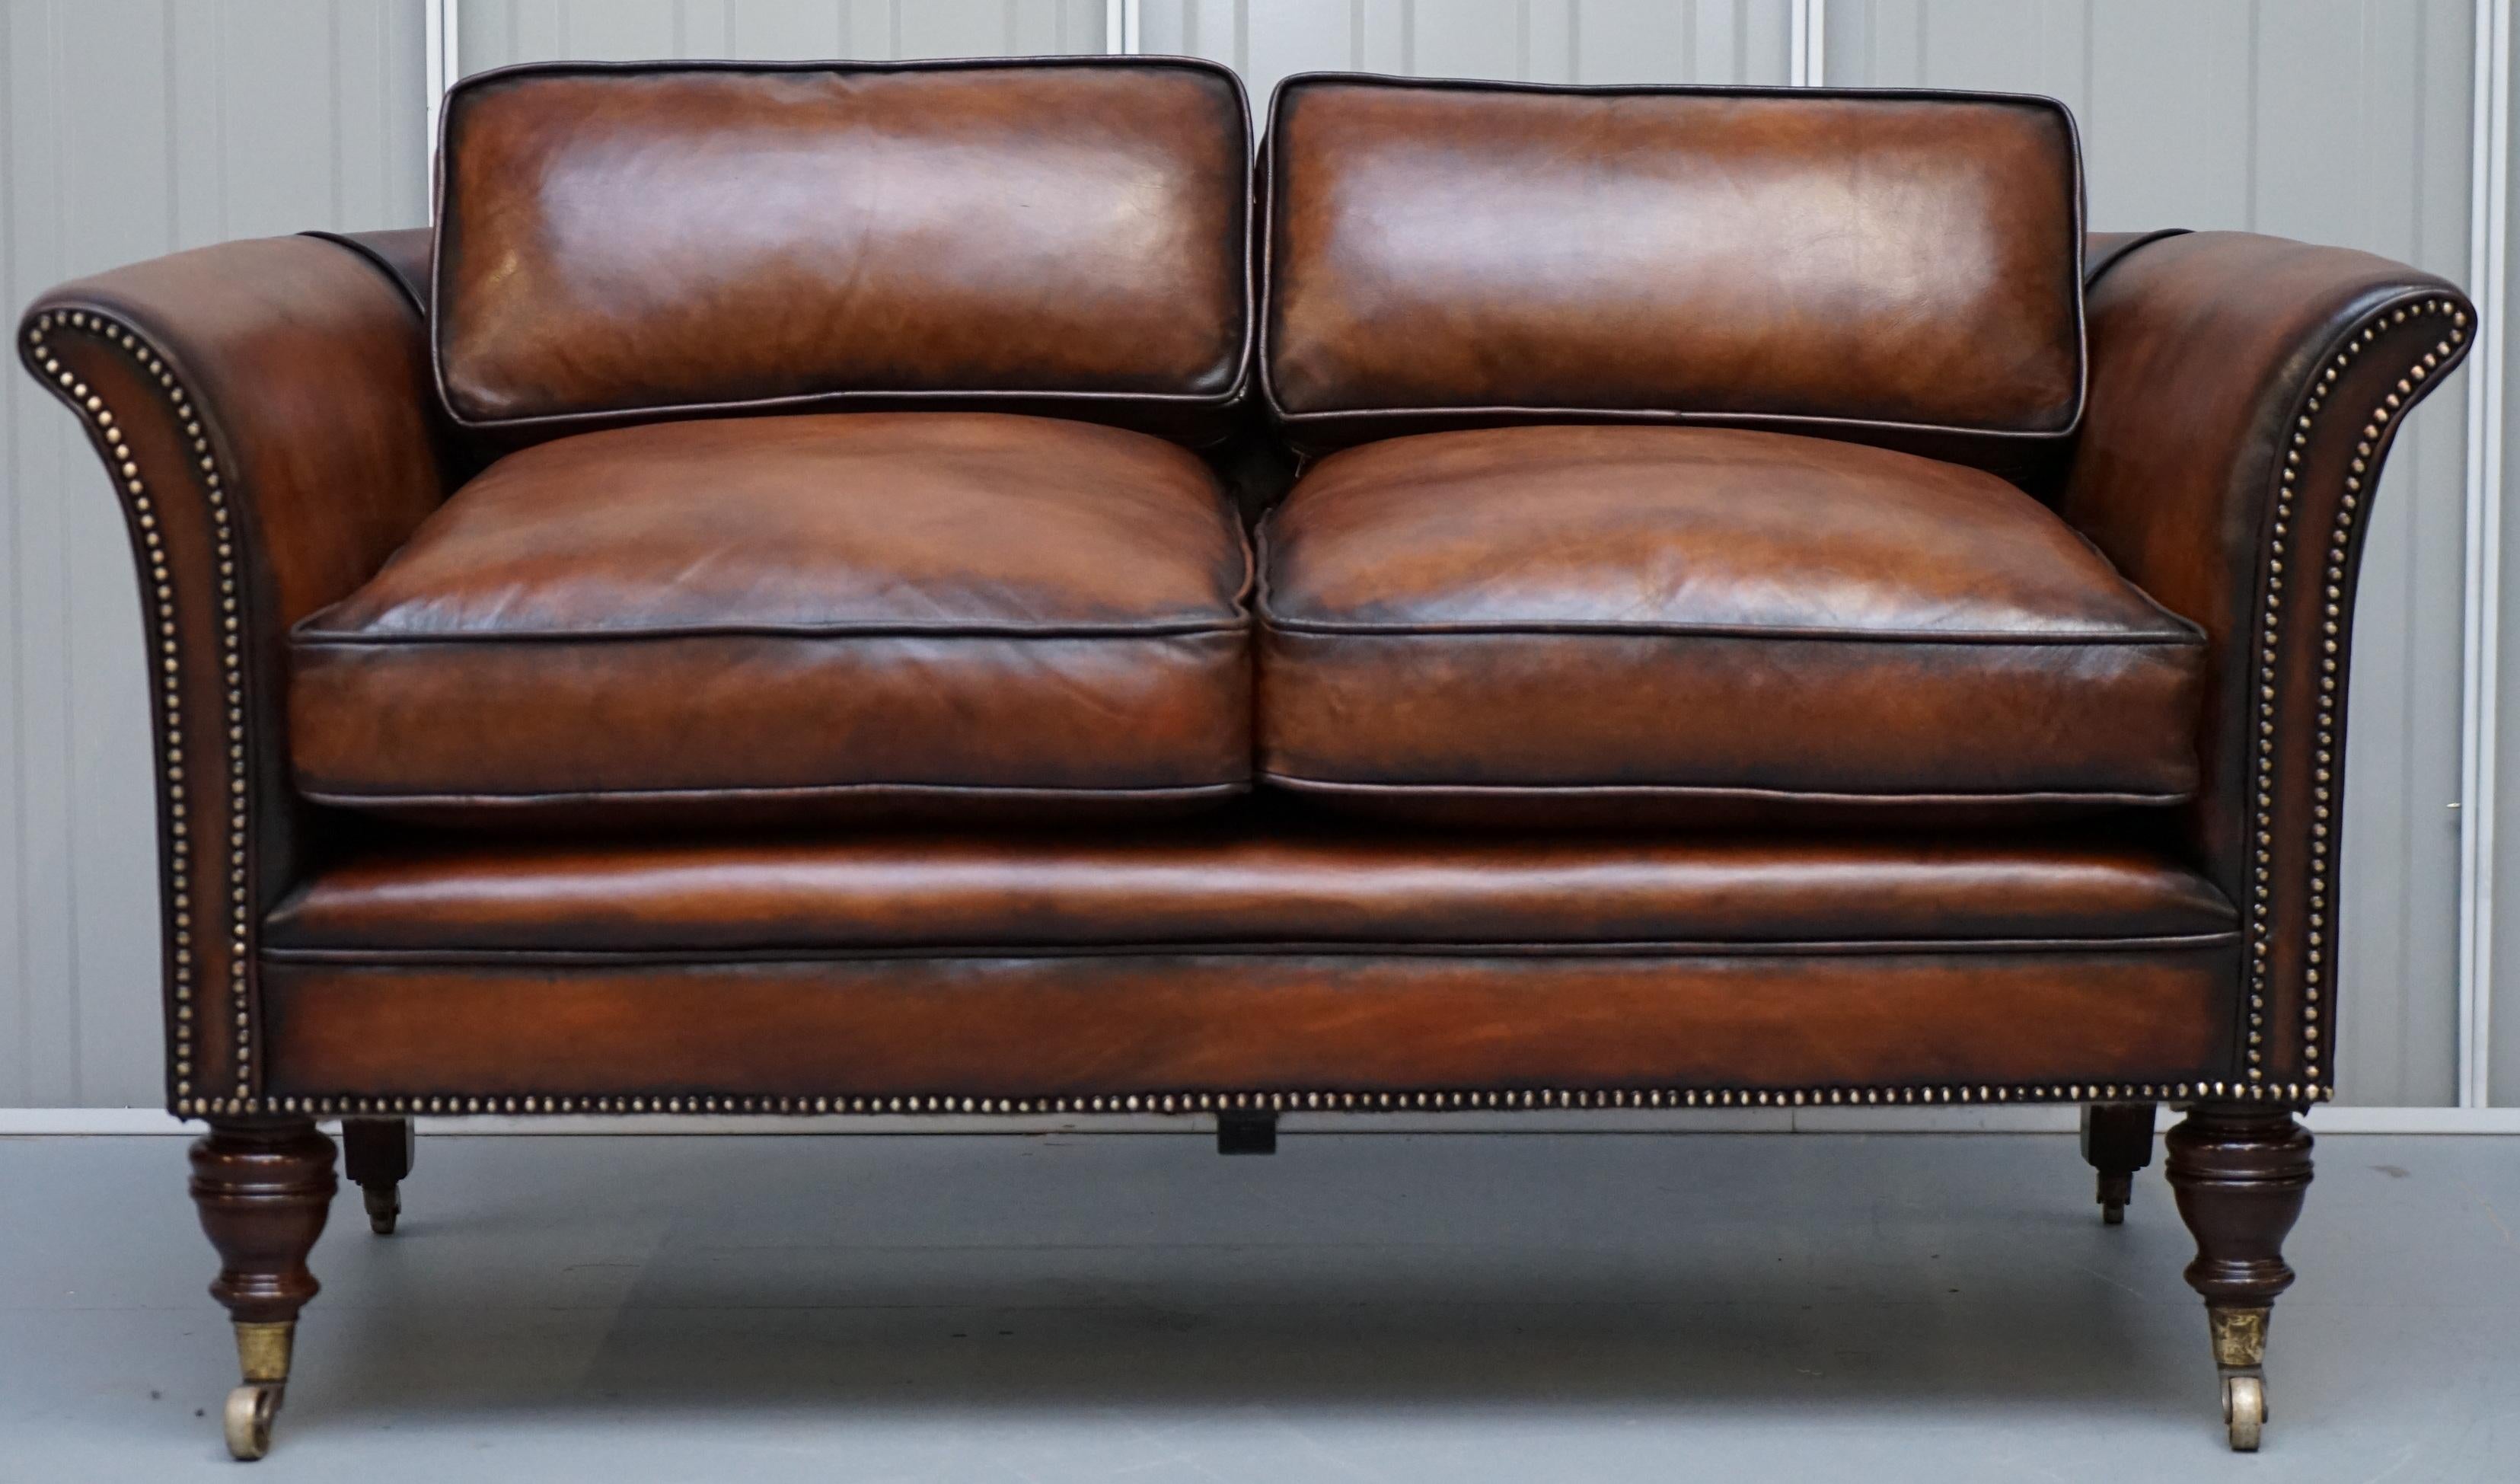 We are delighted to offer for sale this stunning exceptionally rare original early Victorian Howard & Son’s Berners street tobacco brown leather fully restored sofa

I have a Howard & Son's armchair listed under my other items that has just been